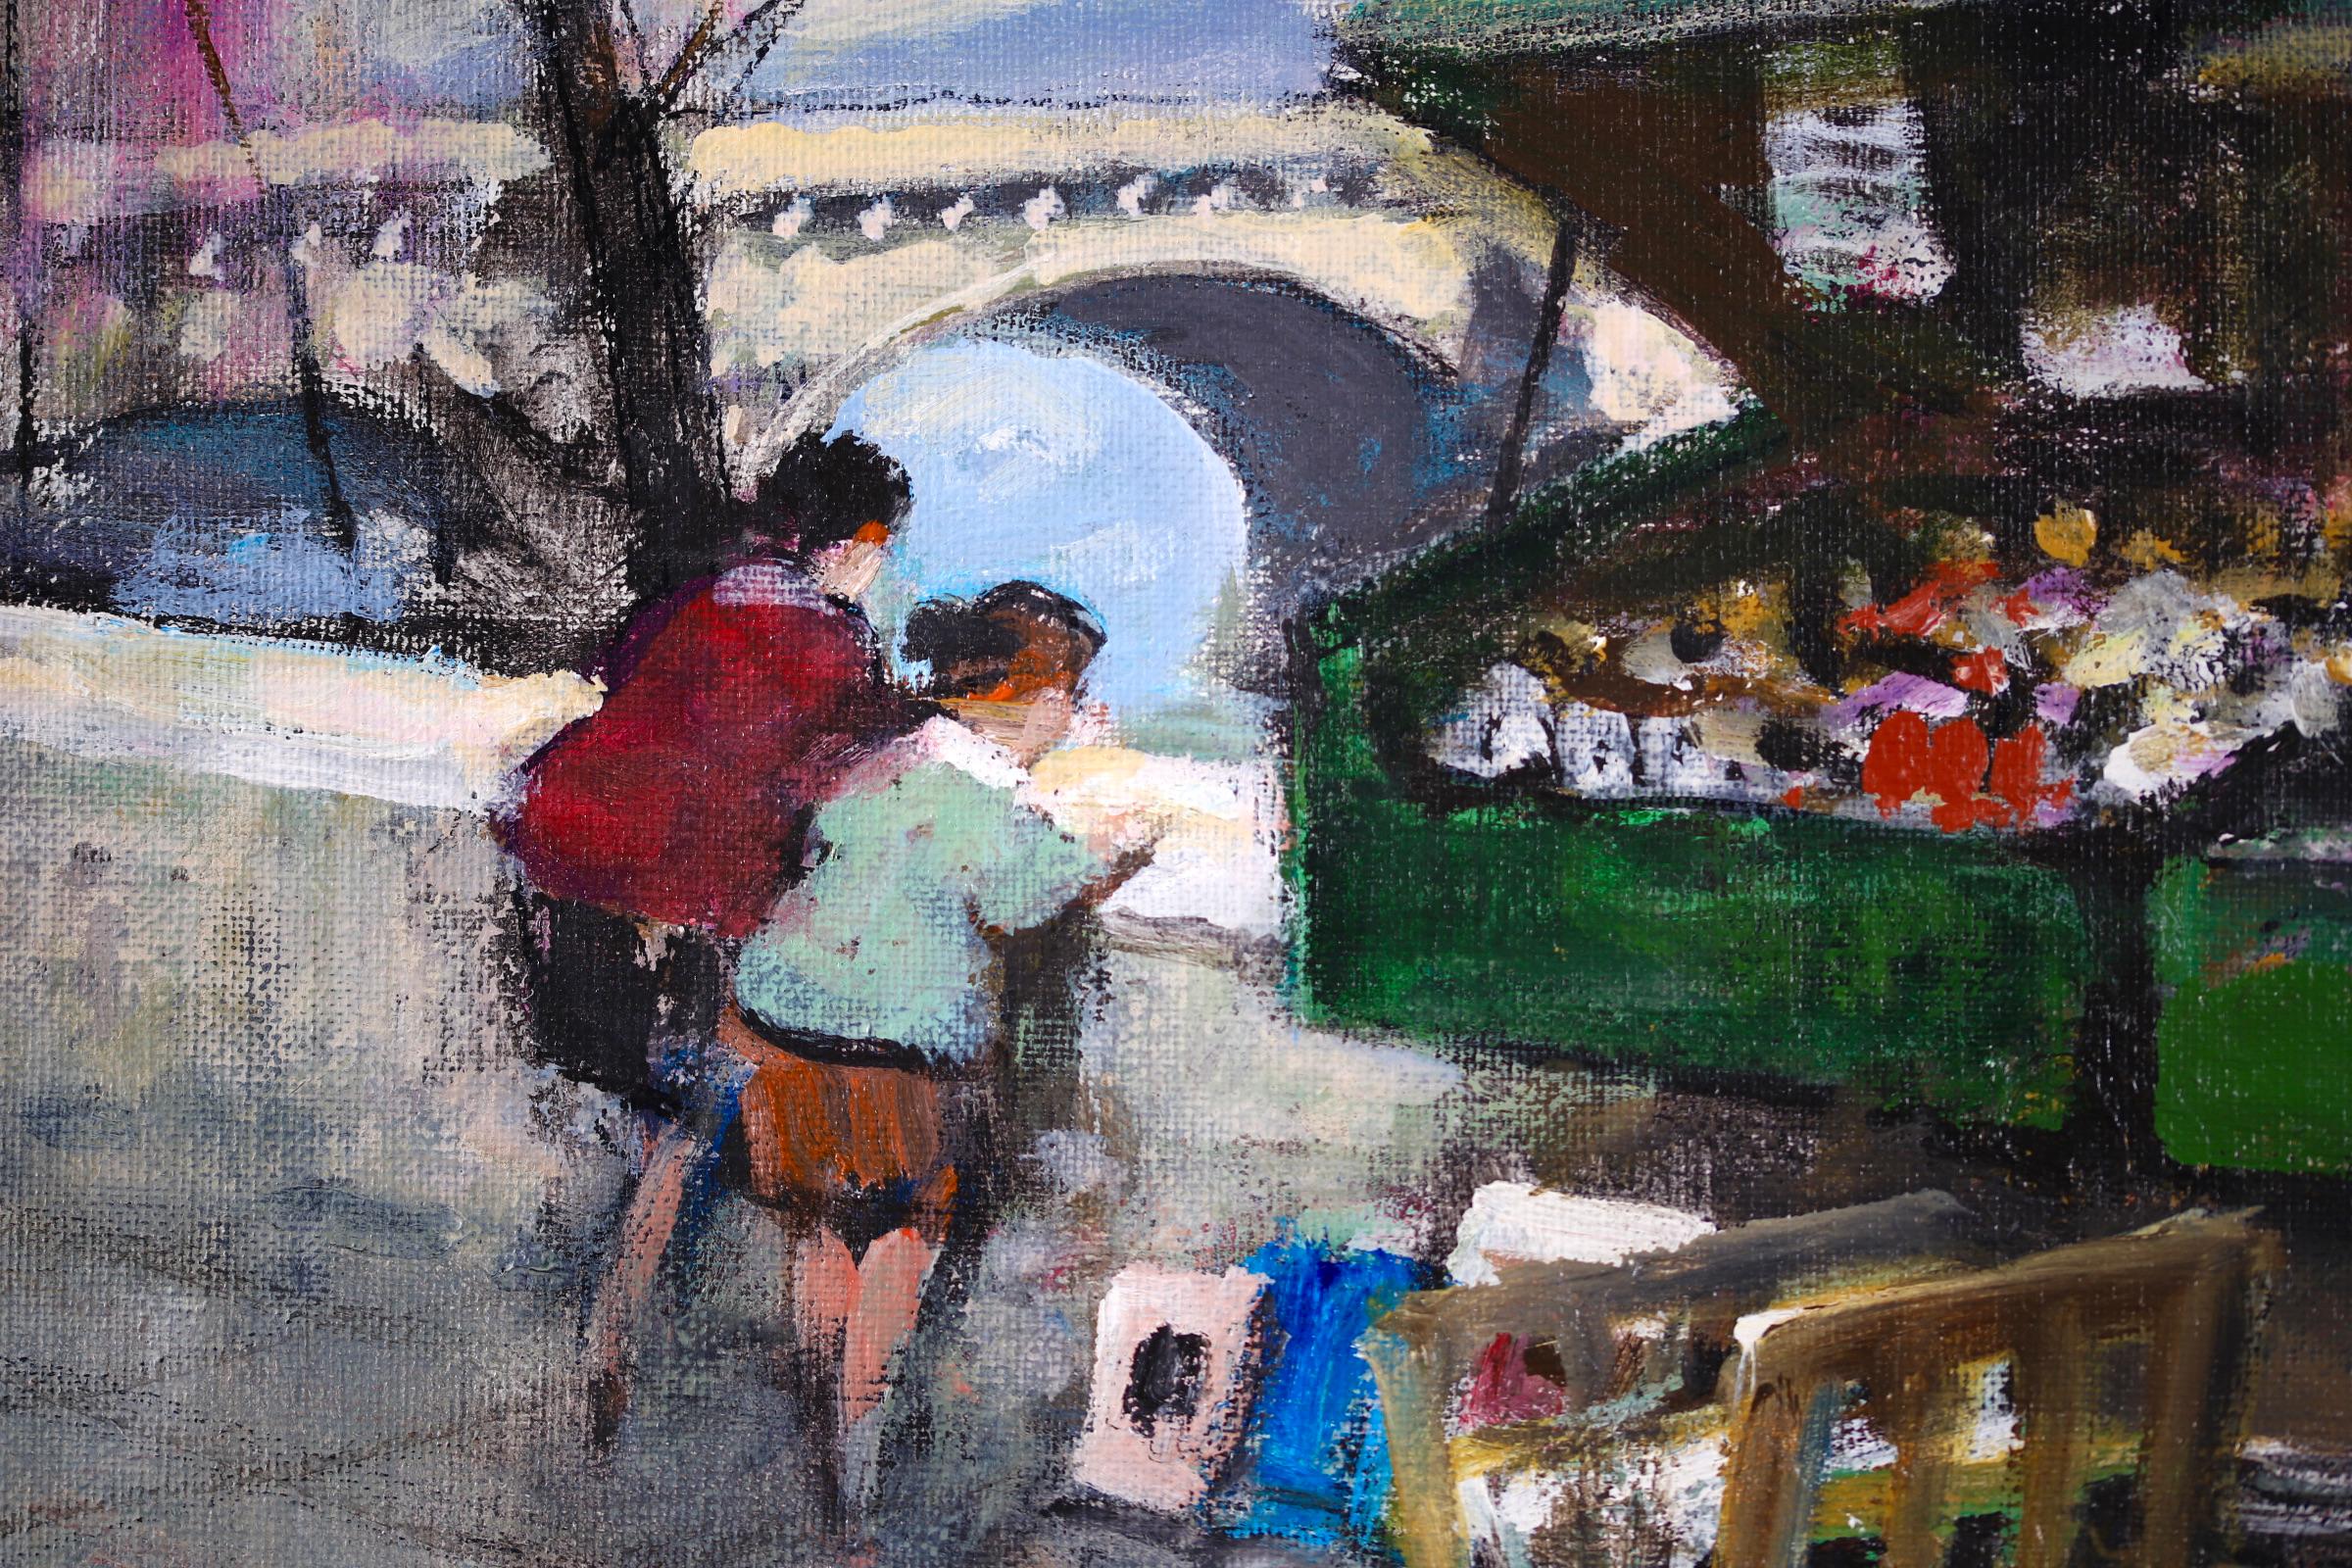 Signed figures in cityscape oil on original canvas circa 1950 by French impressionist painter Jules Rene Herve. The piece depicts a view of a bookseller's stall beside the River Seine in Paris, France, with blossom trees overhead.

Signature:
Signed